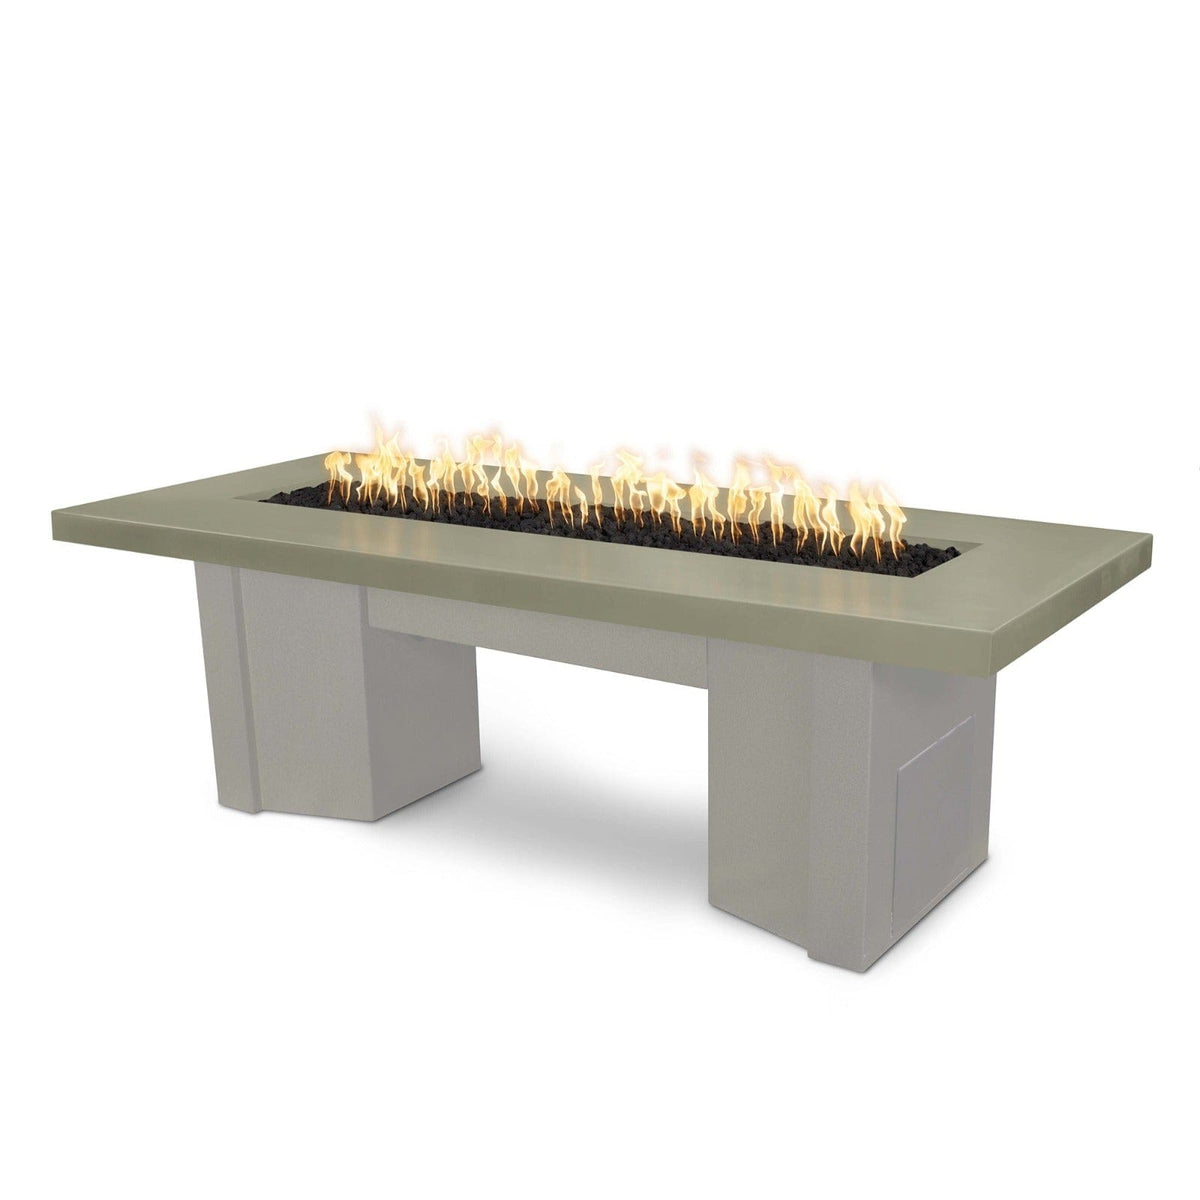 The Outdoor Plus Fire Features Ash (-ASH) / Pewter Powder Coated Steel (-PEW) The Outdoor Plus 78&quot; Alameda Fire Table Smooth Concrete in Liquid Propane - Flame Sense System with Push Button Spark Igniter / OPT-ALMGFRC78FSEN-LP